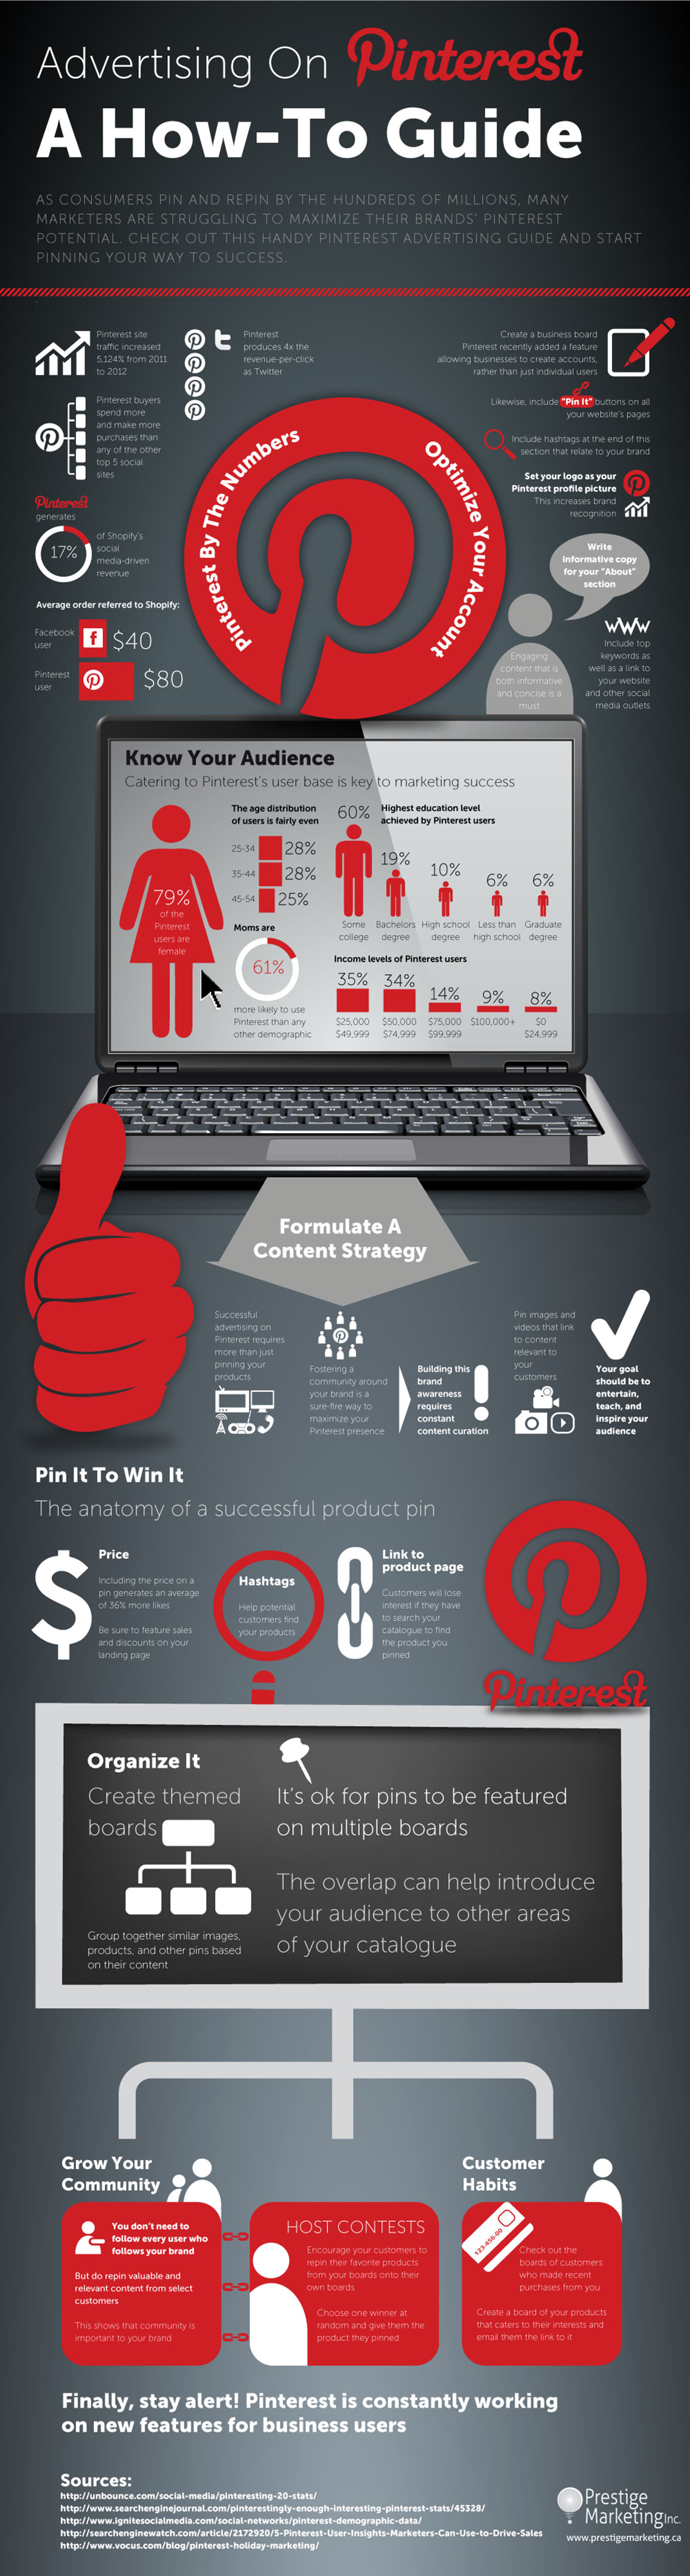 How to Advertise Your Business on Pinterest Infographic